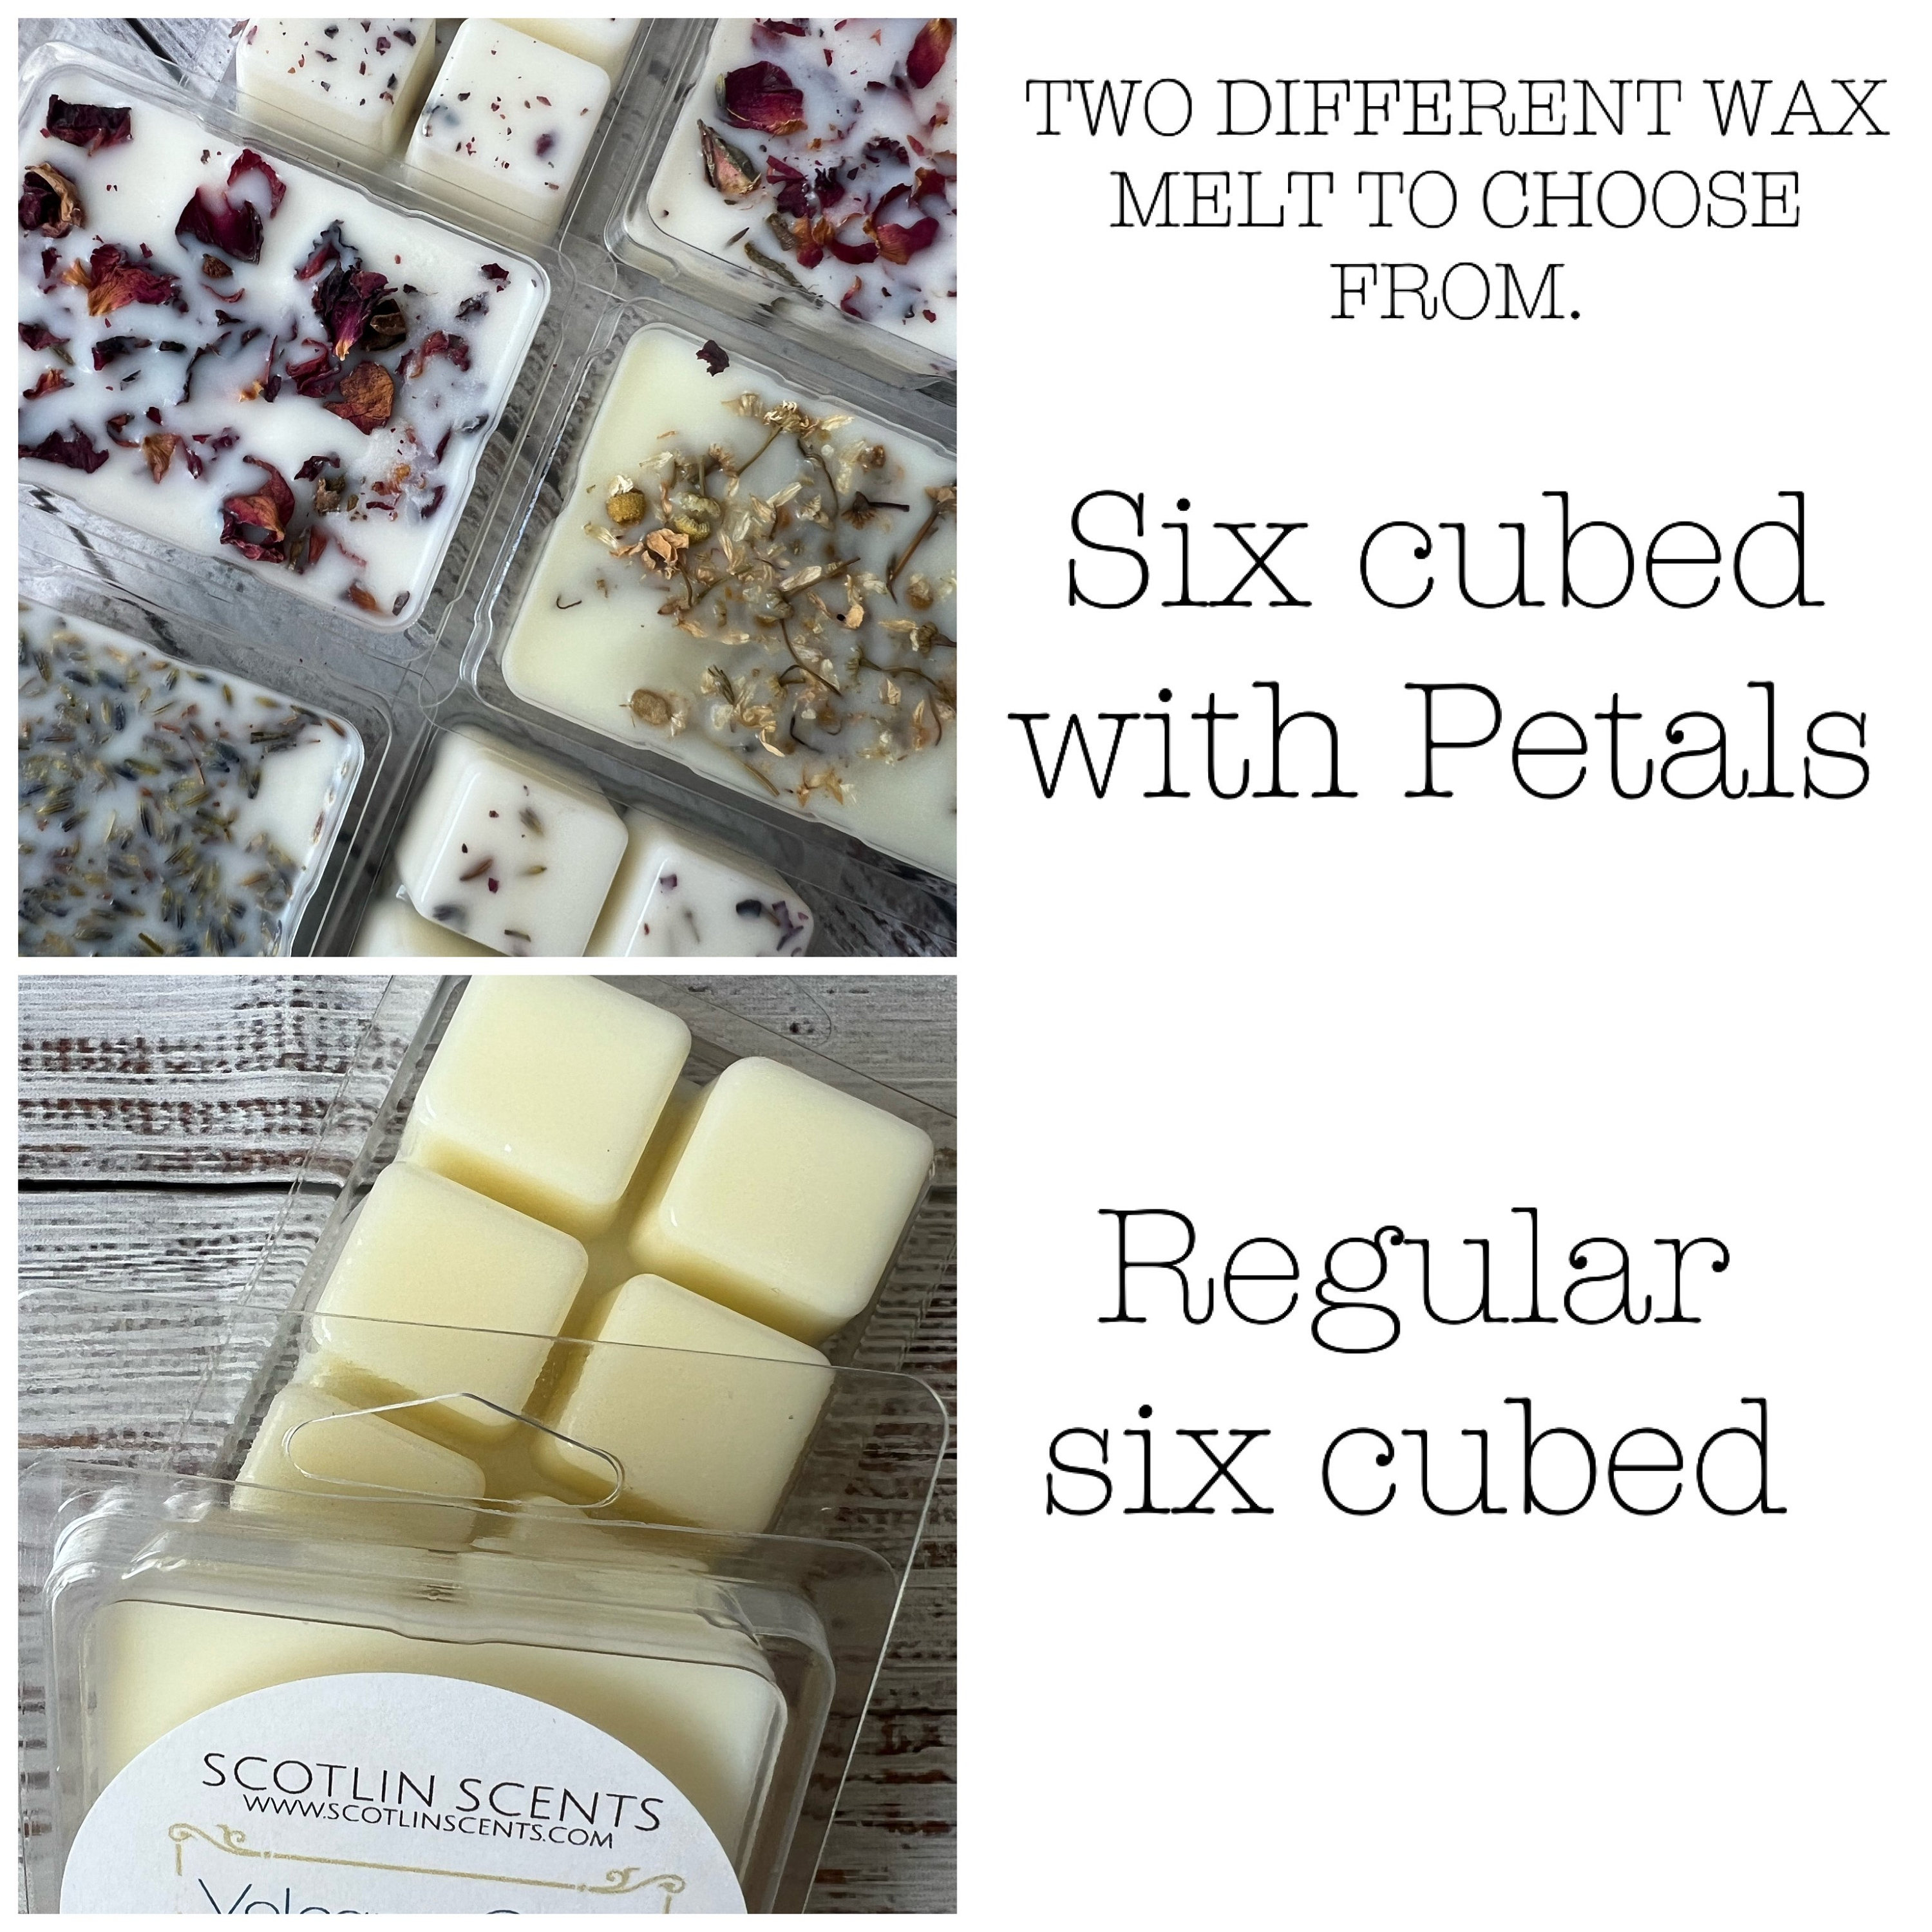 Scented Wax Melts, Peppermint + Eucalyptus Scent, Peppermint Wax Melts, Wax  Melts Wax Cubes Strong Scent, Handmade, Scented Wax Melts Bulk, USA Made